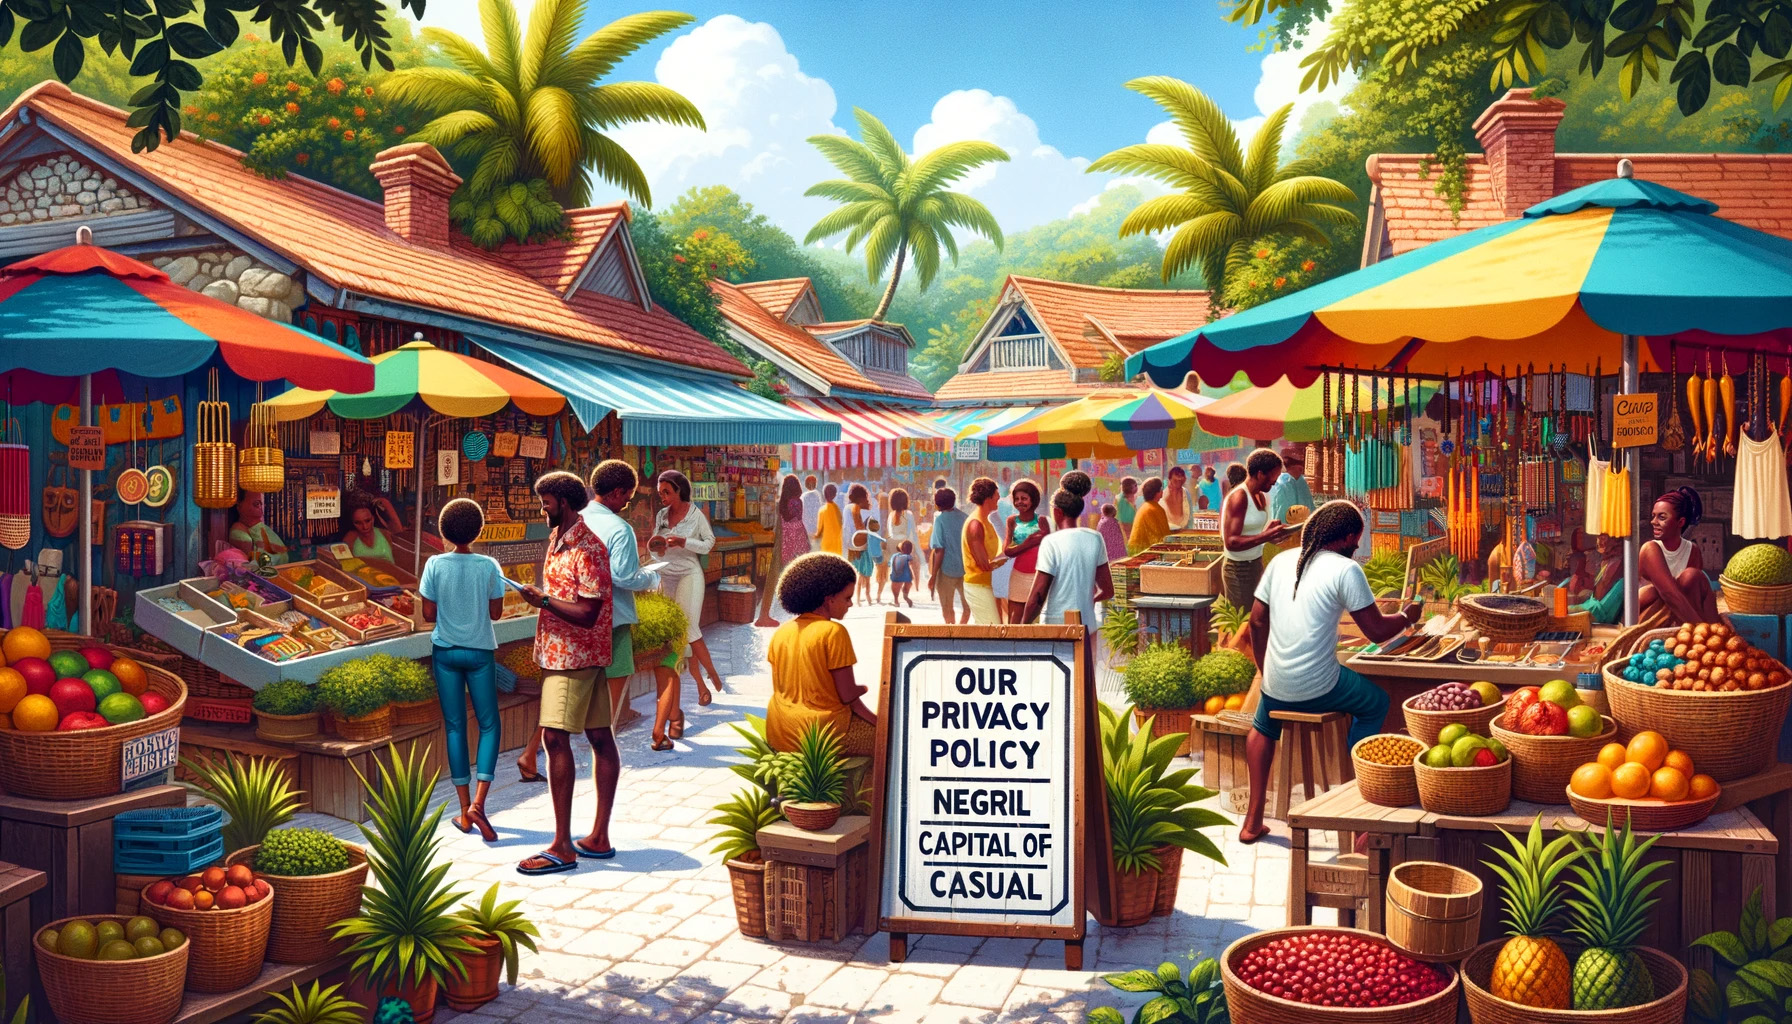 Our Privacy Policy - Negril Capital of Casual Jamaica